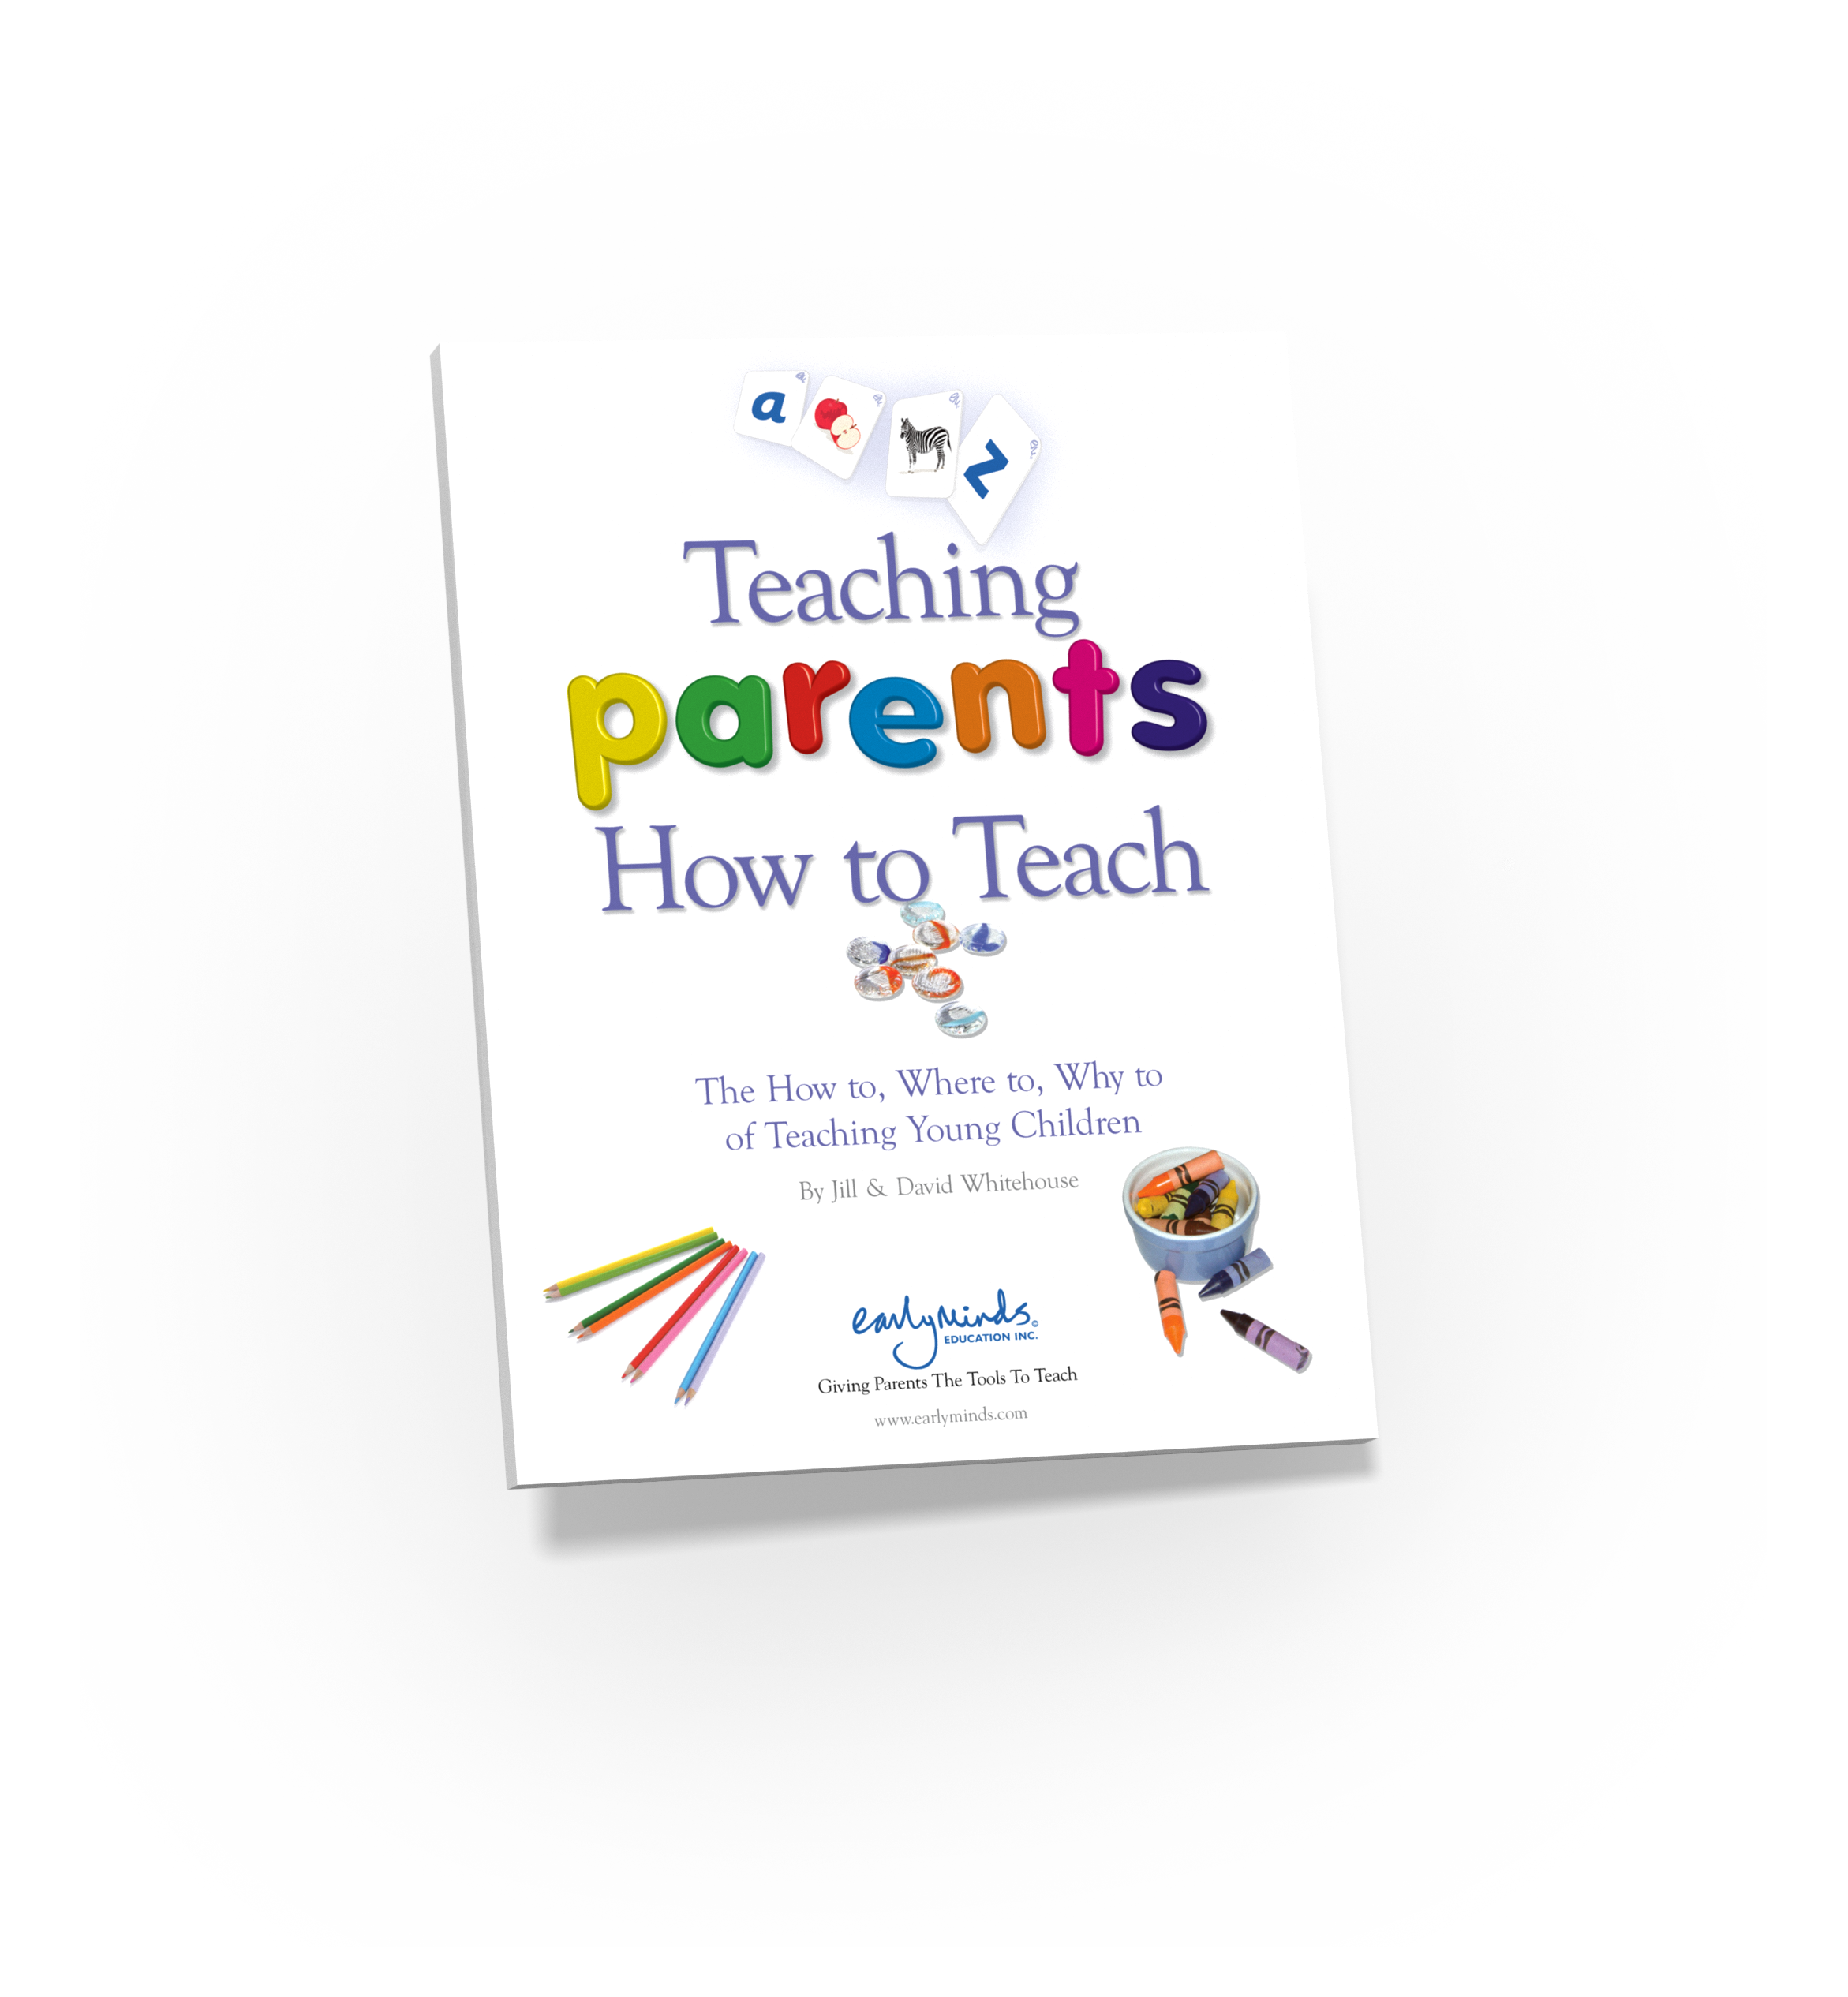 image of our book Teaching Parents How To Teach from earlyminds.com